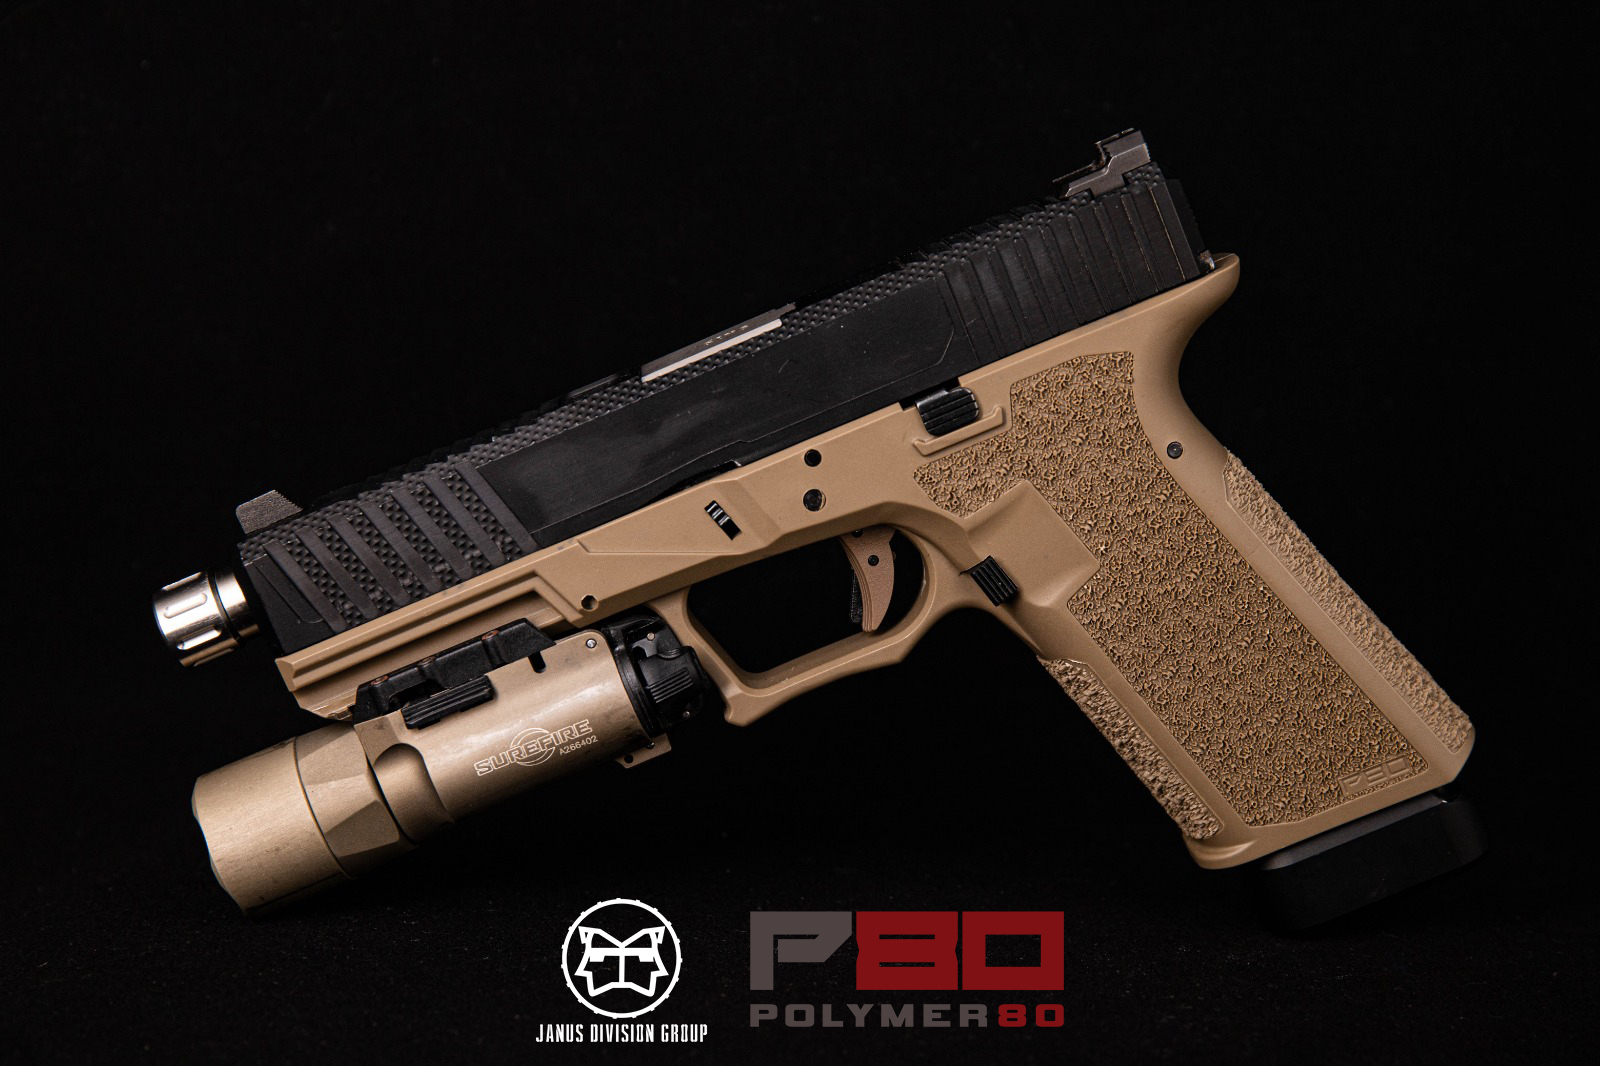 Polymer80, Inc. manufactures high quality fiber-reinforced 80% complete rec...